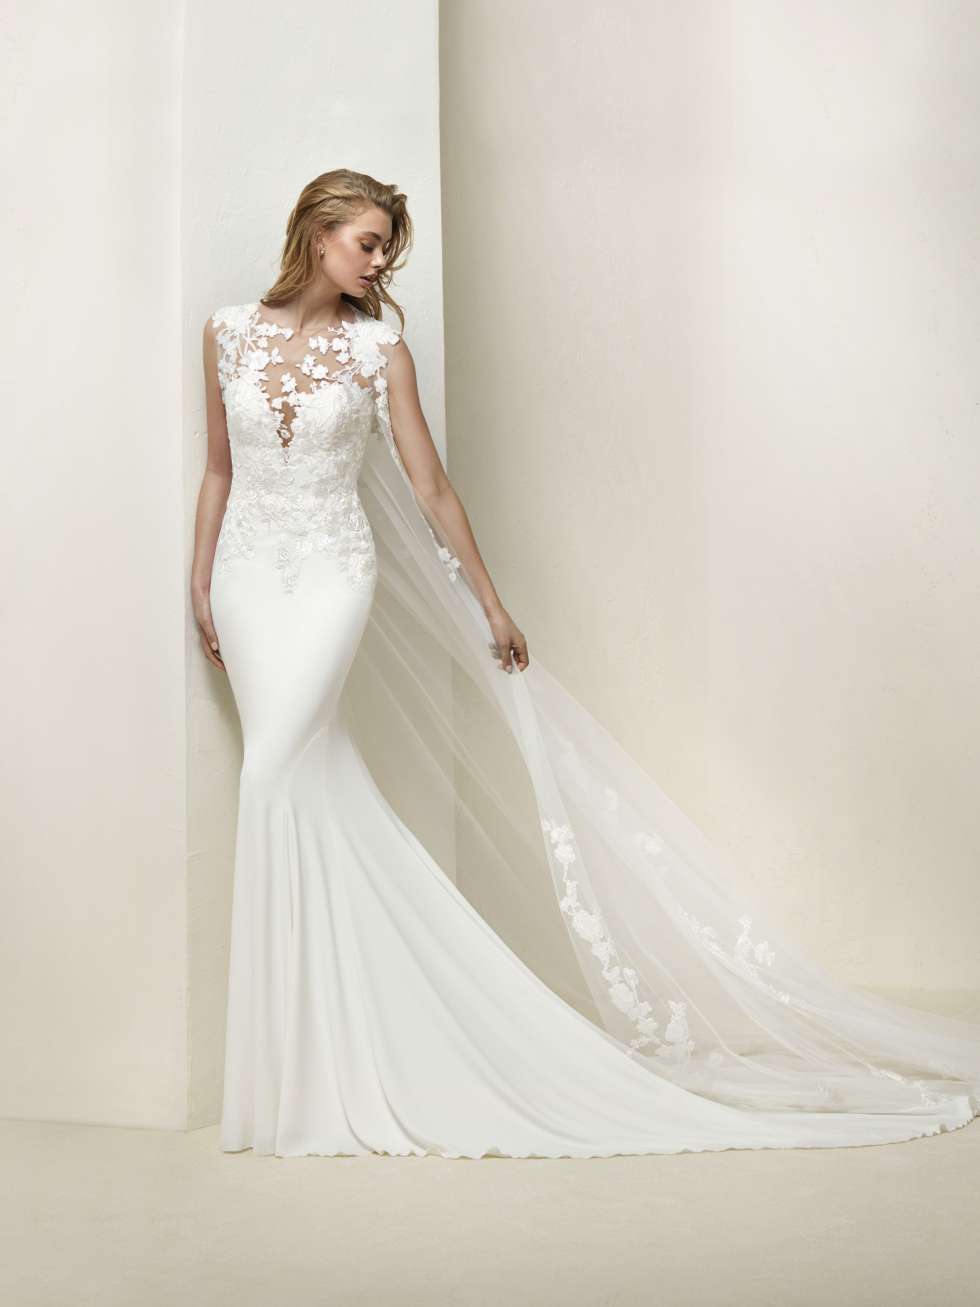 The 2018 Spring Wedding Dress Collection by Pronovias